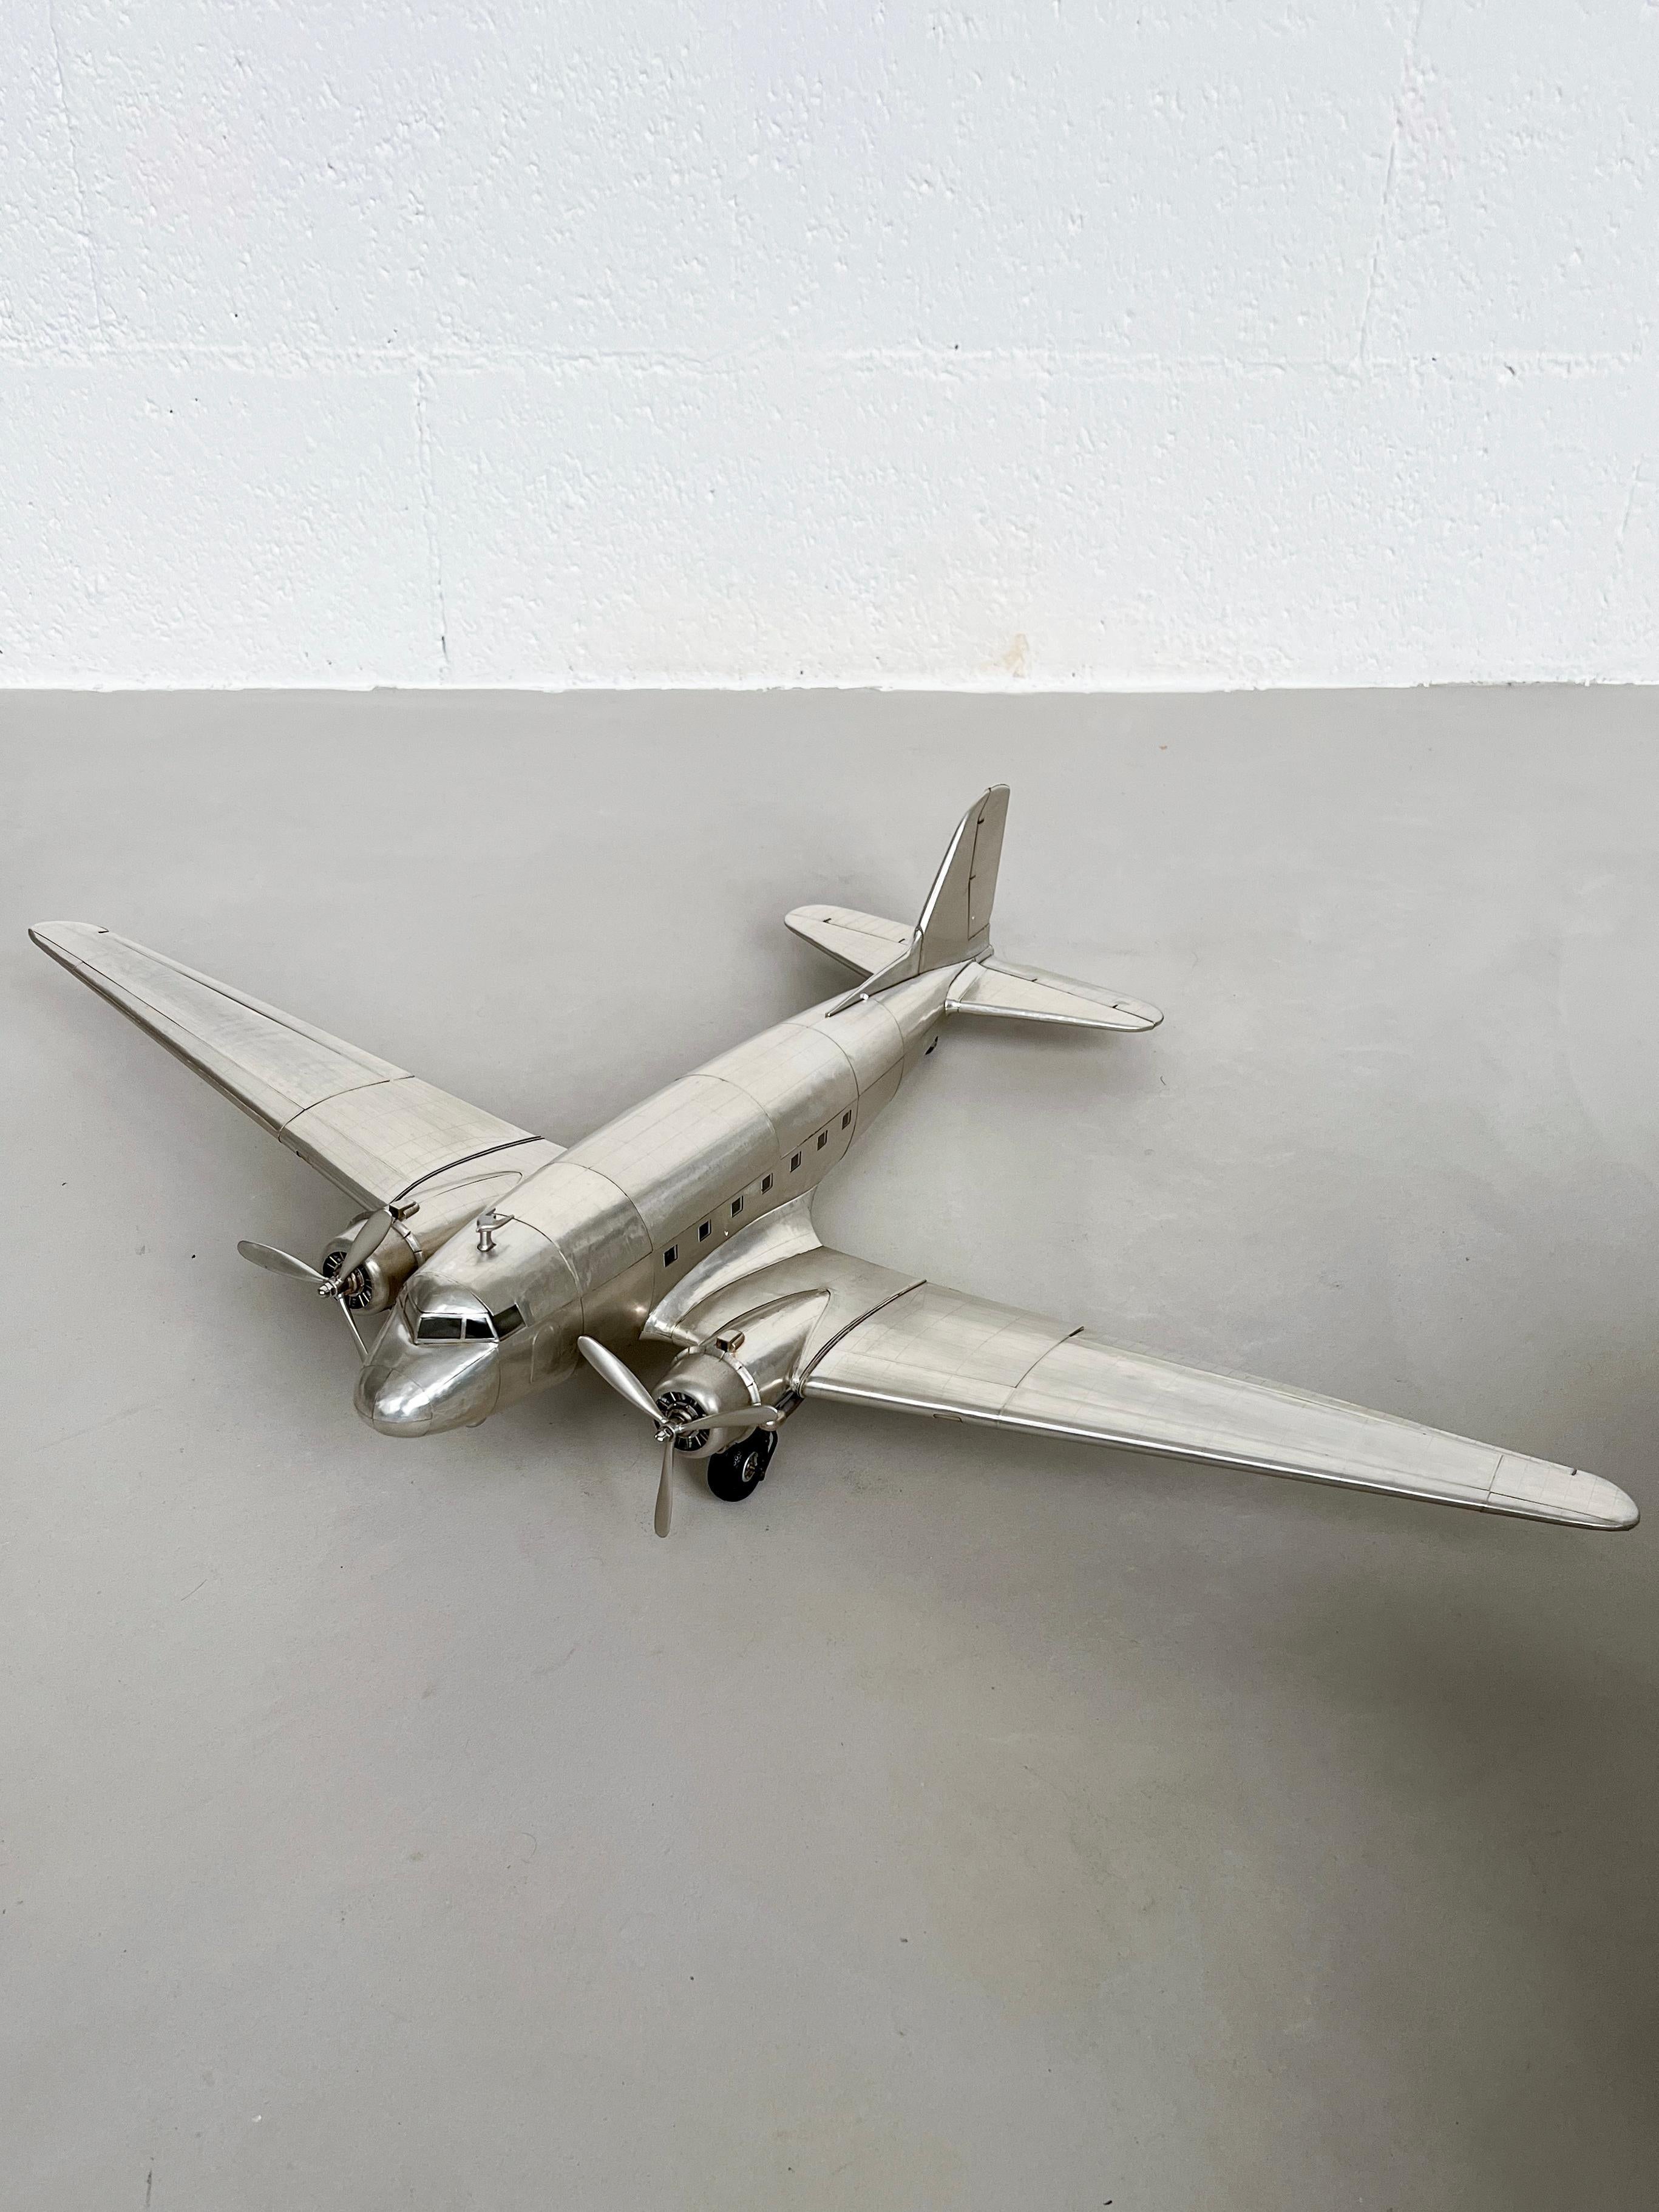 Plane Sculpture - Shelf Decor

Decorate your living room, bedroom or mancave in style with this huge model of the Douglas DC-3 - the most iconic aircraft of the Twentieth century, the model that laid the bases for commercial aviation and air freight